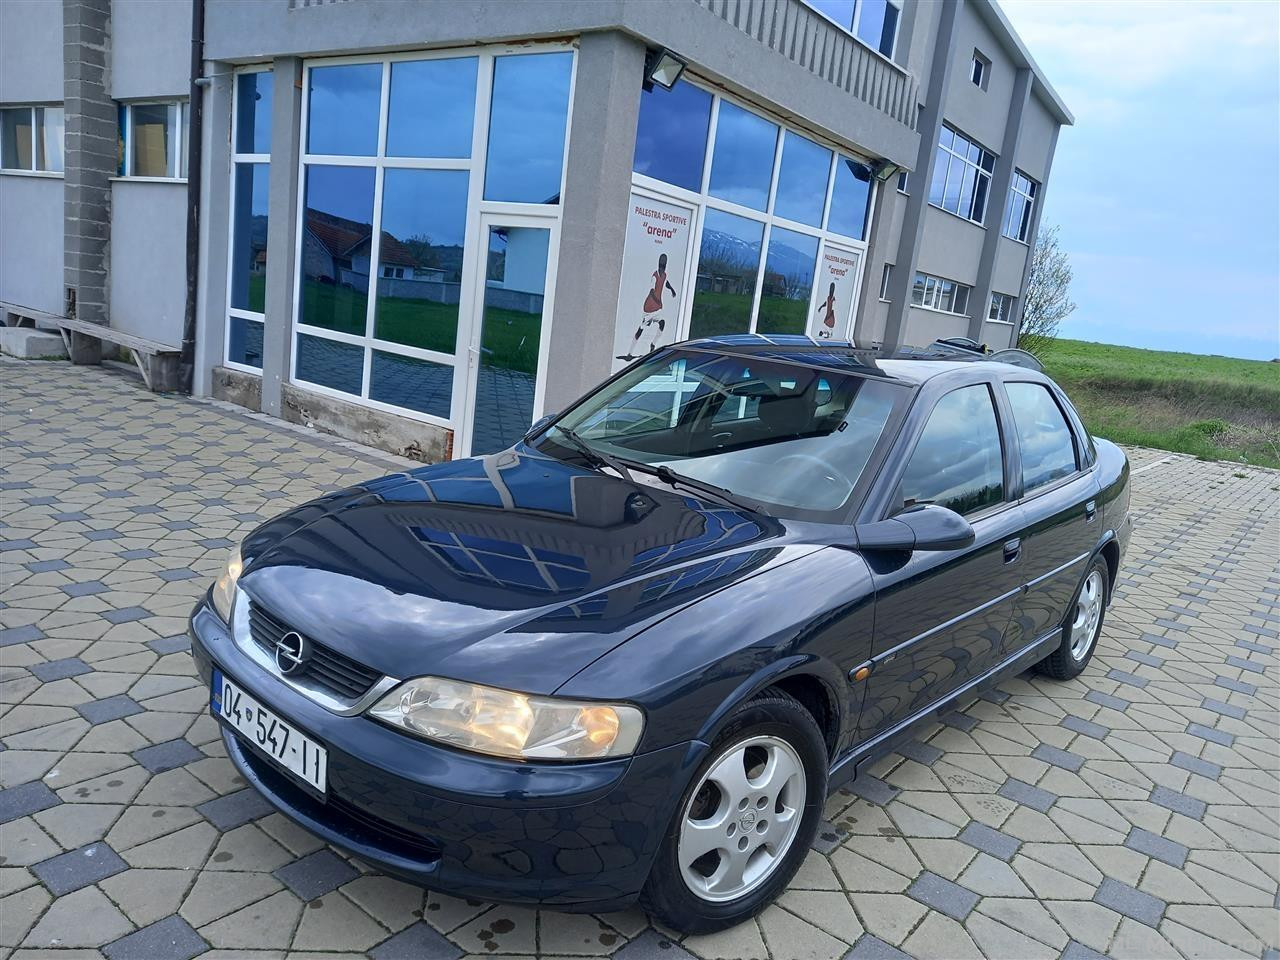 SHES OPEL VECTRA 2.0 DIZELL